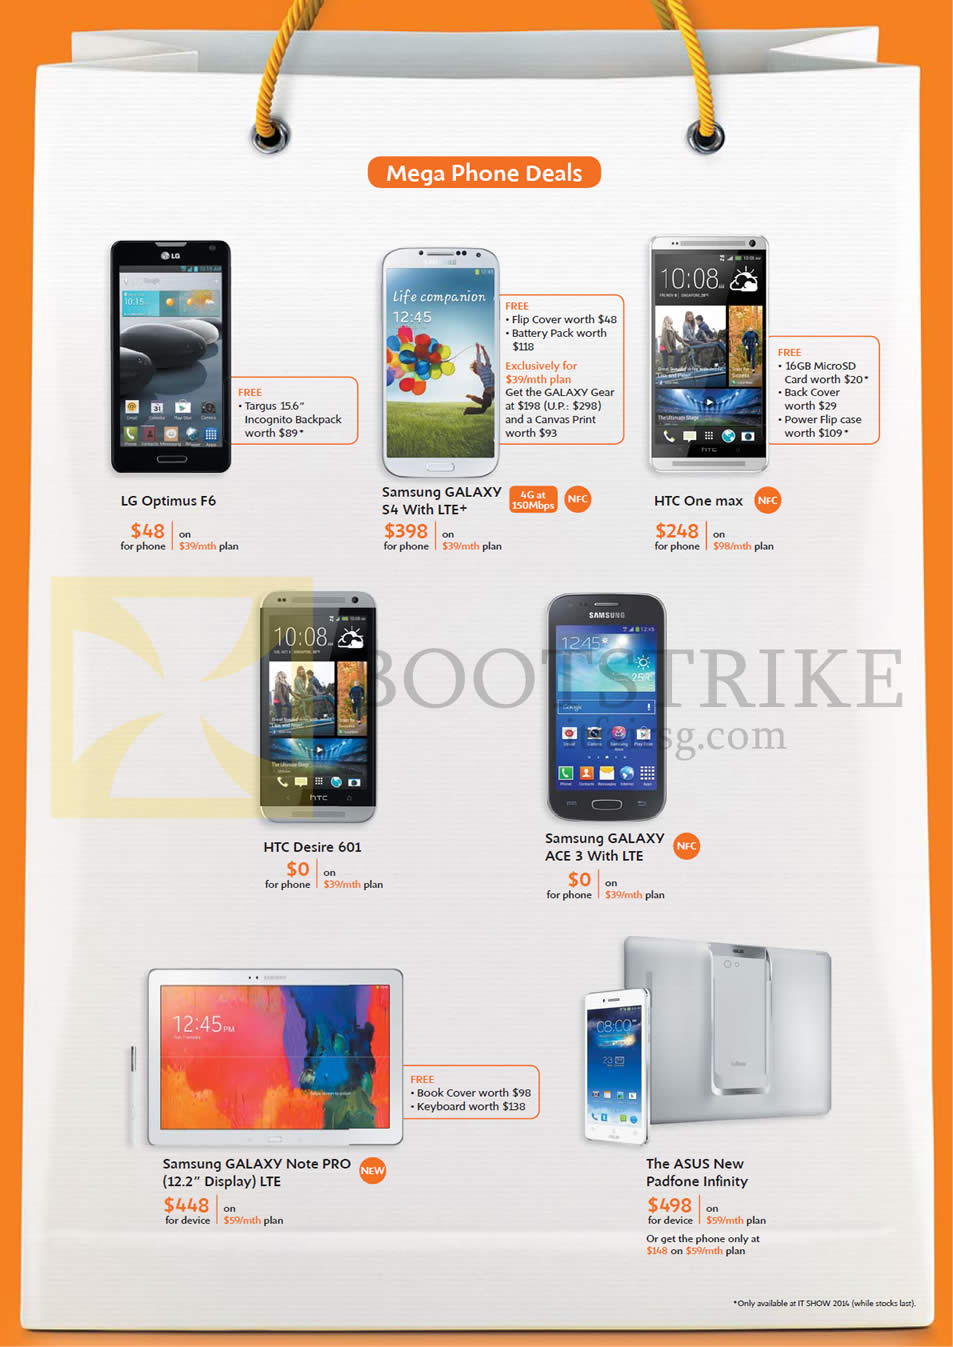 IT SHOW 2014 price list image brochure of M1 Mobile LG Optimus F6, Samsung Galaxy S4, Ace 3, Note Pro, HTC Desire 601, One Max, ASUS New Padfone Infinity